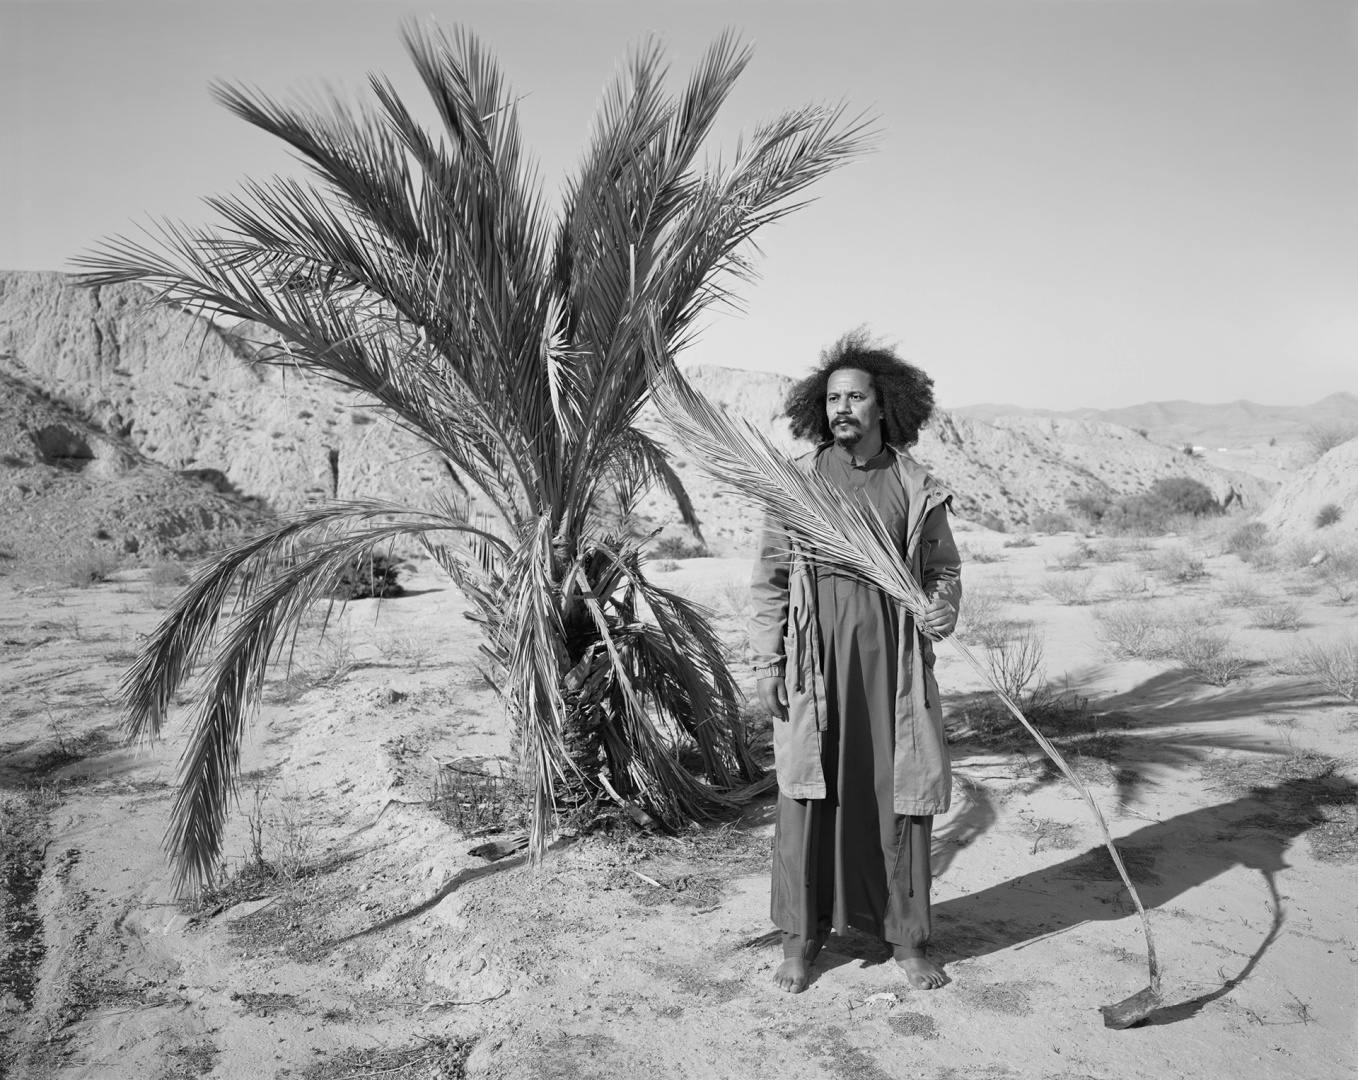 Black and white photograph of a person stood in a desert environment, featured in the Sony World Photo Awards 2023